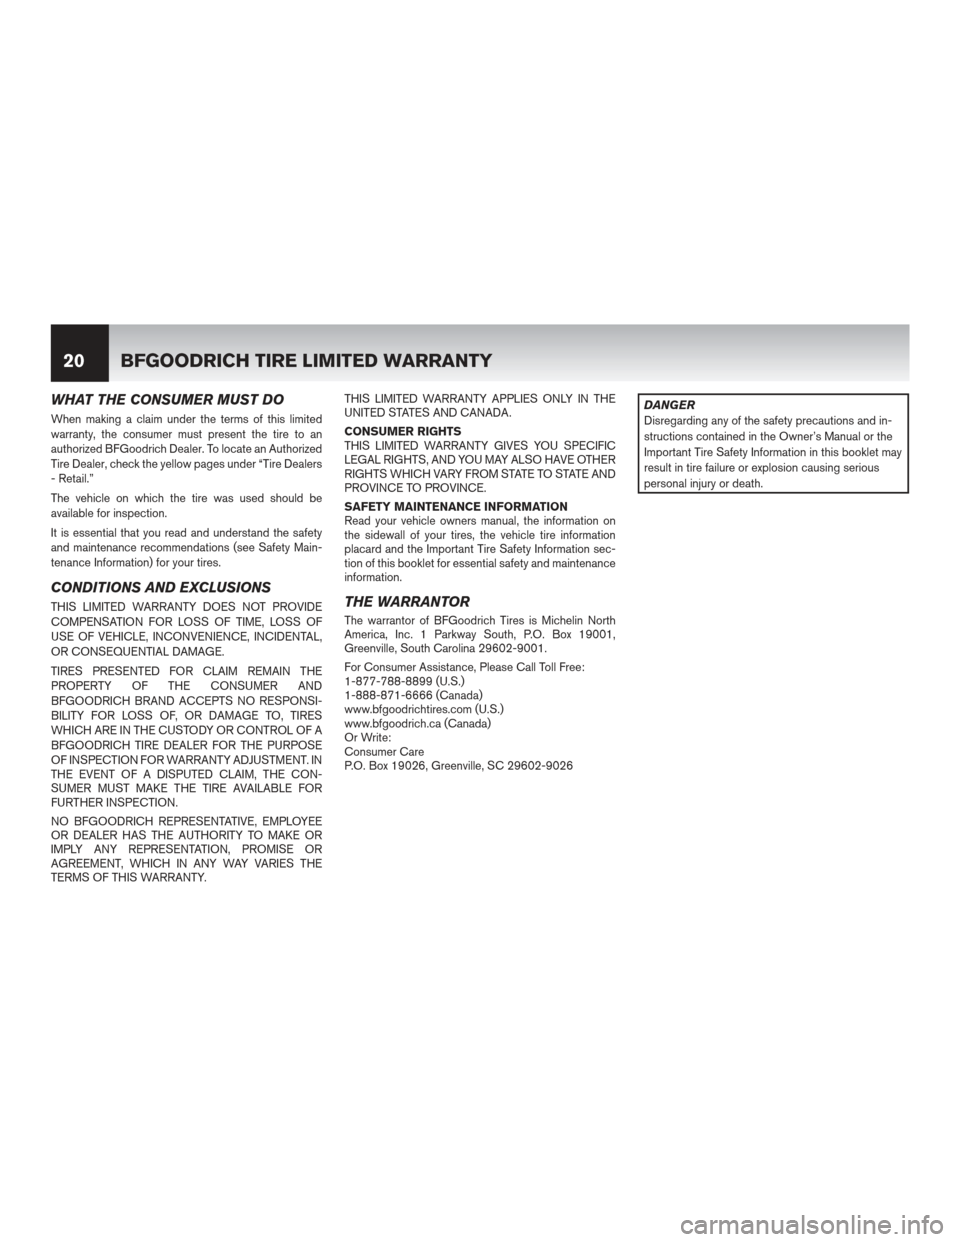 NISSAN MURANO 2012 2.G Warranty Booklet WHAT THE CONSUMER MUST DO
When making a claim under the terms of this limited
warranty, the consumer must present the tire to an
authorized BFGoodrich Dealer. To locate an Authorized
Tire Dealer, chec